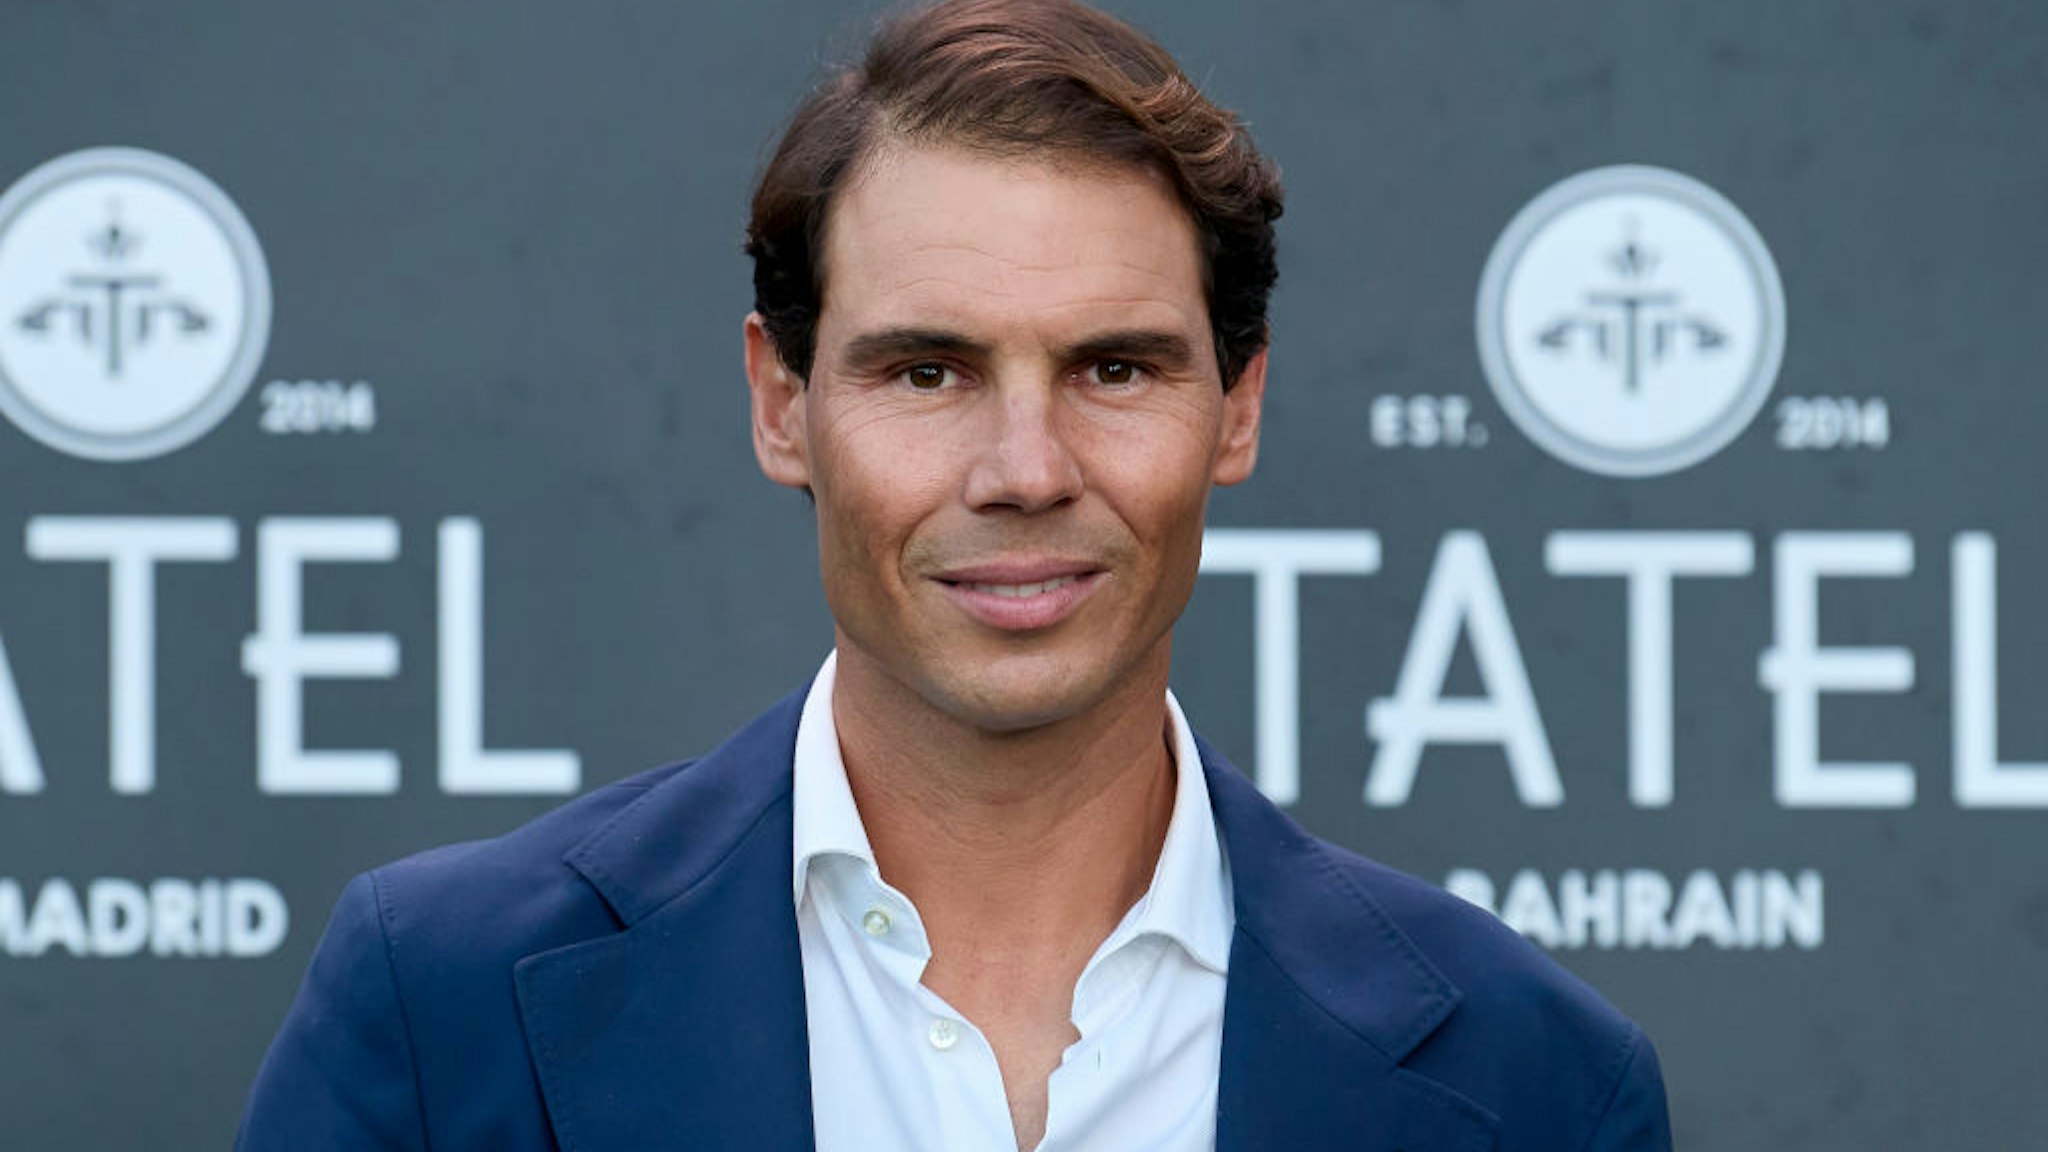 MADRID, SPAIN - OCTOBER 19: Tennis player Rafa Nadal attends the presentation of the new venues of the Tatel group in Beverly Hills and Tatel Bahrain on October 19, 2021 in Madrid, Spain. (Photo by Carlos Alvarez/Getty Images)